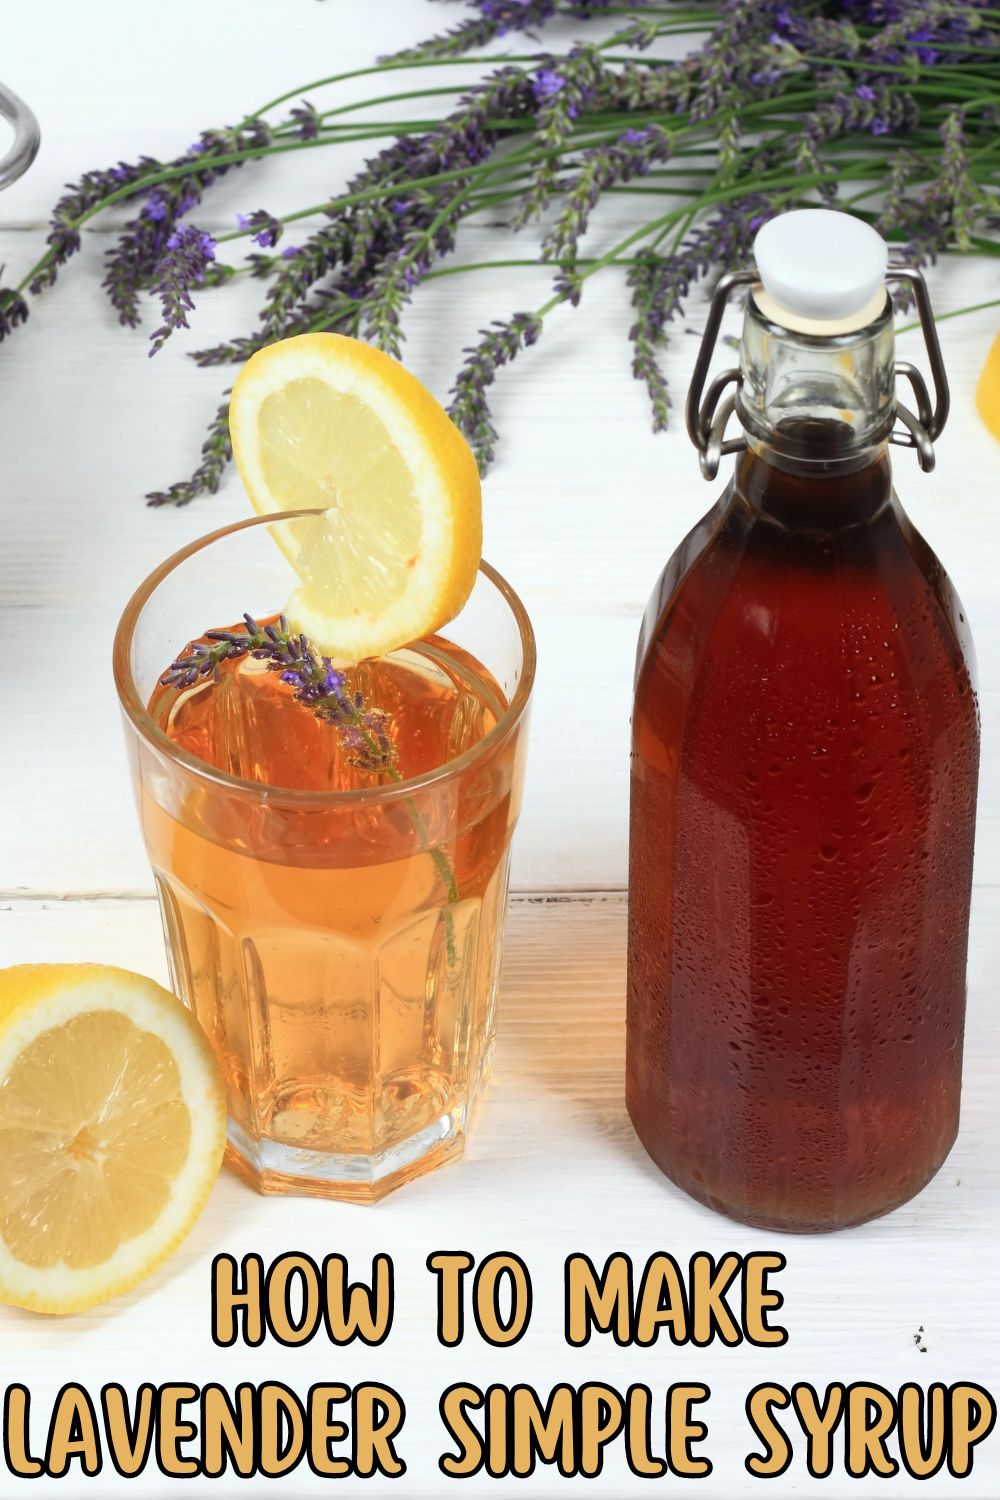 How to make lavender simple syrup.